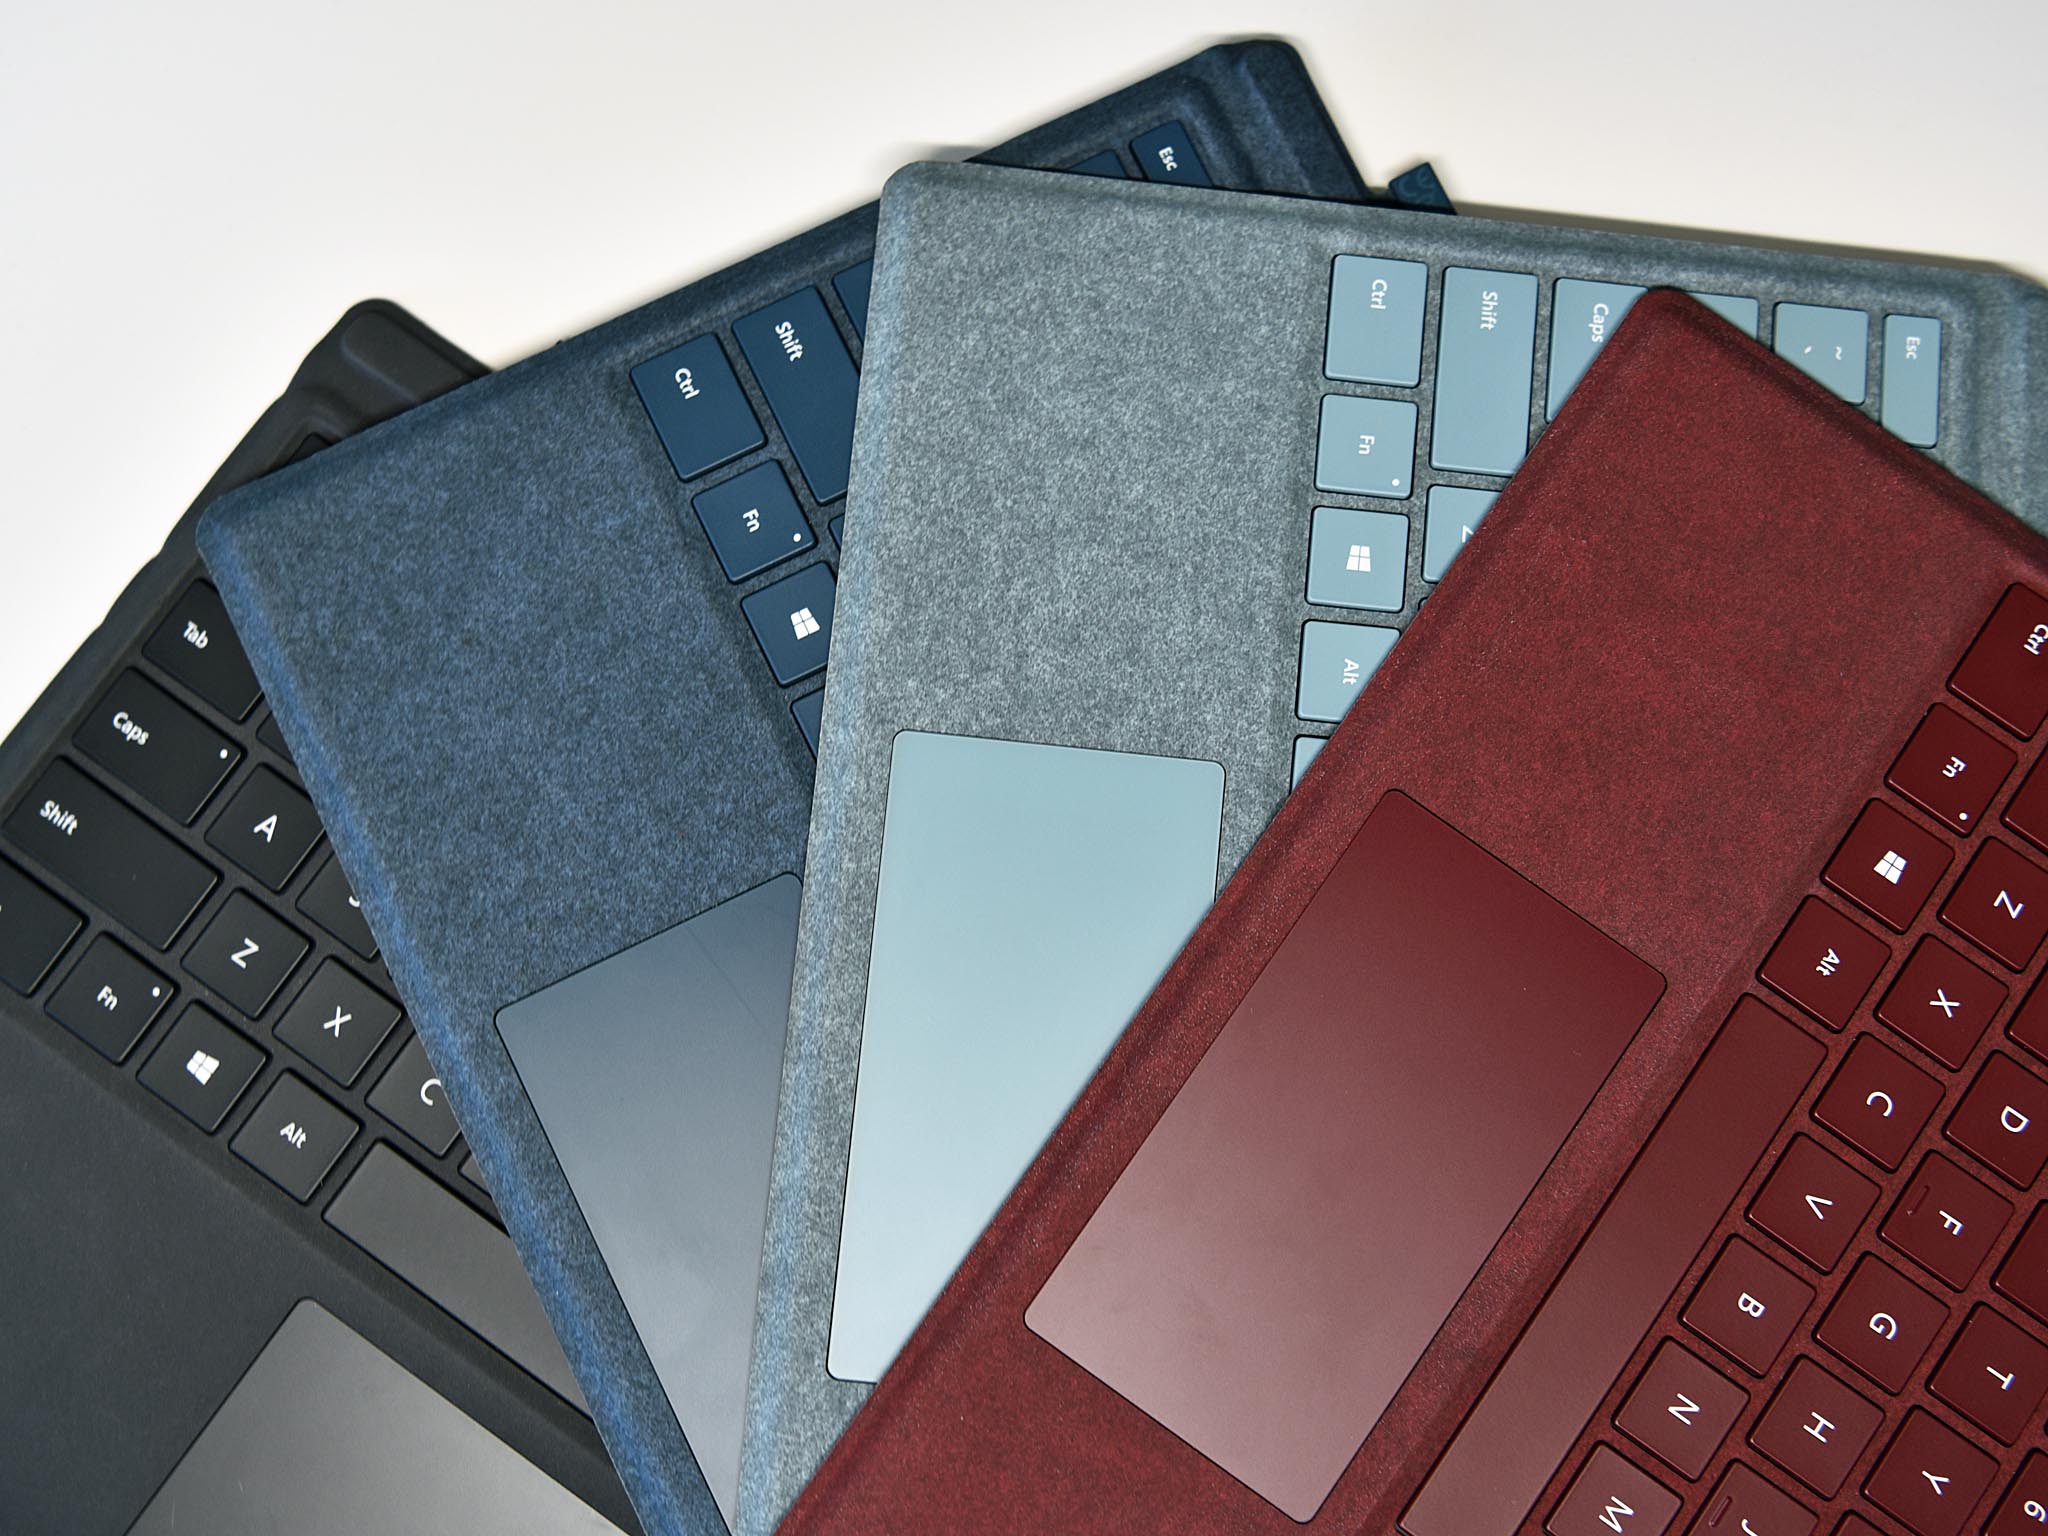 surface-pro-type-covers-1.jpg